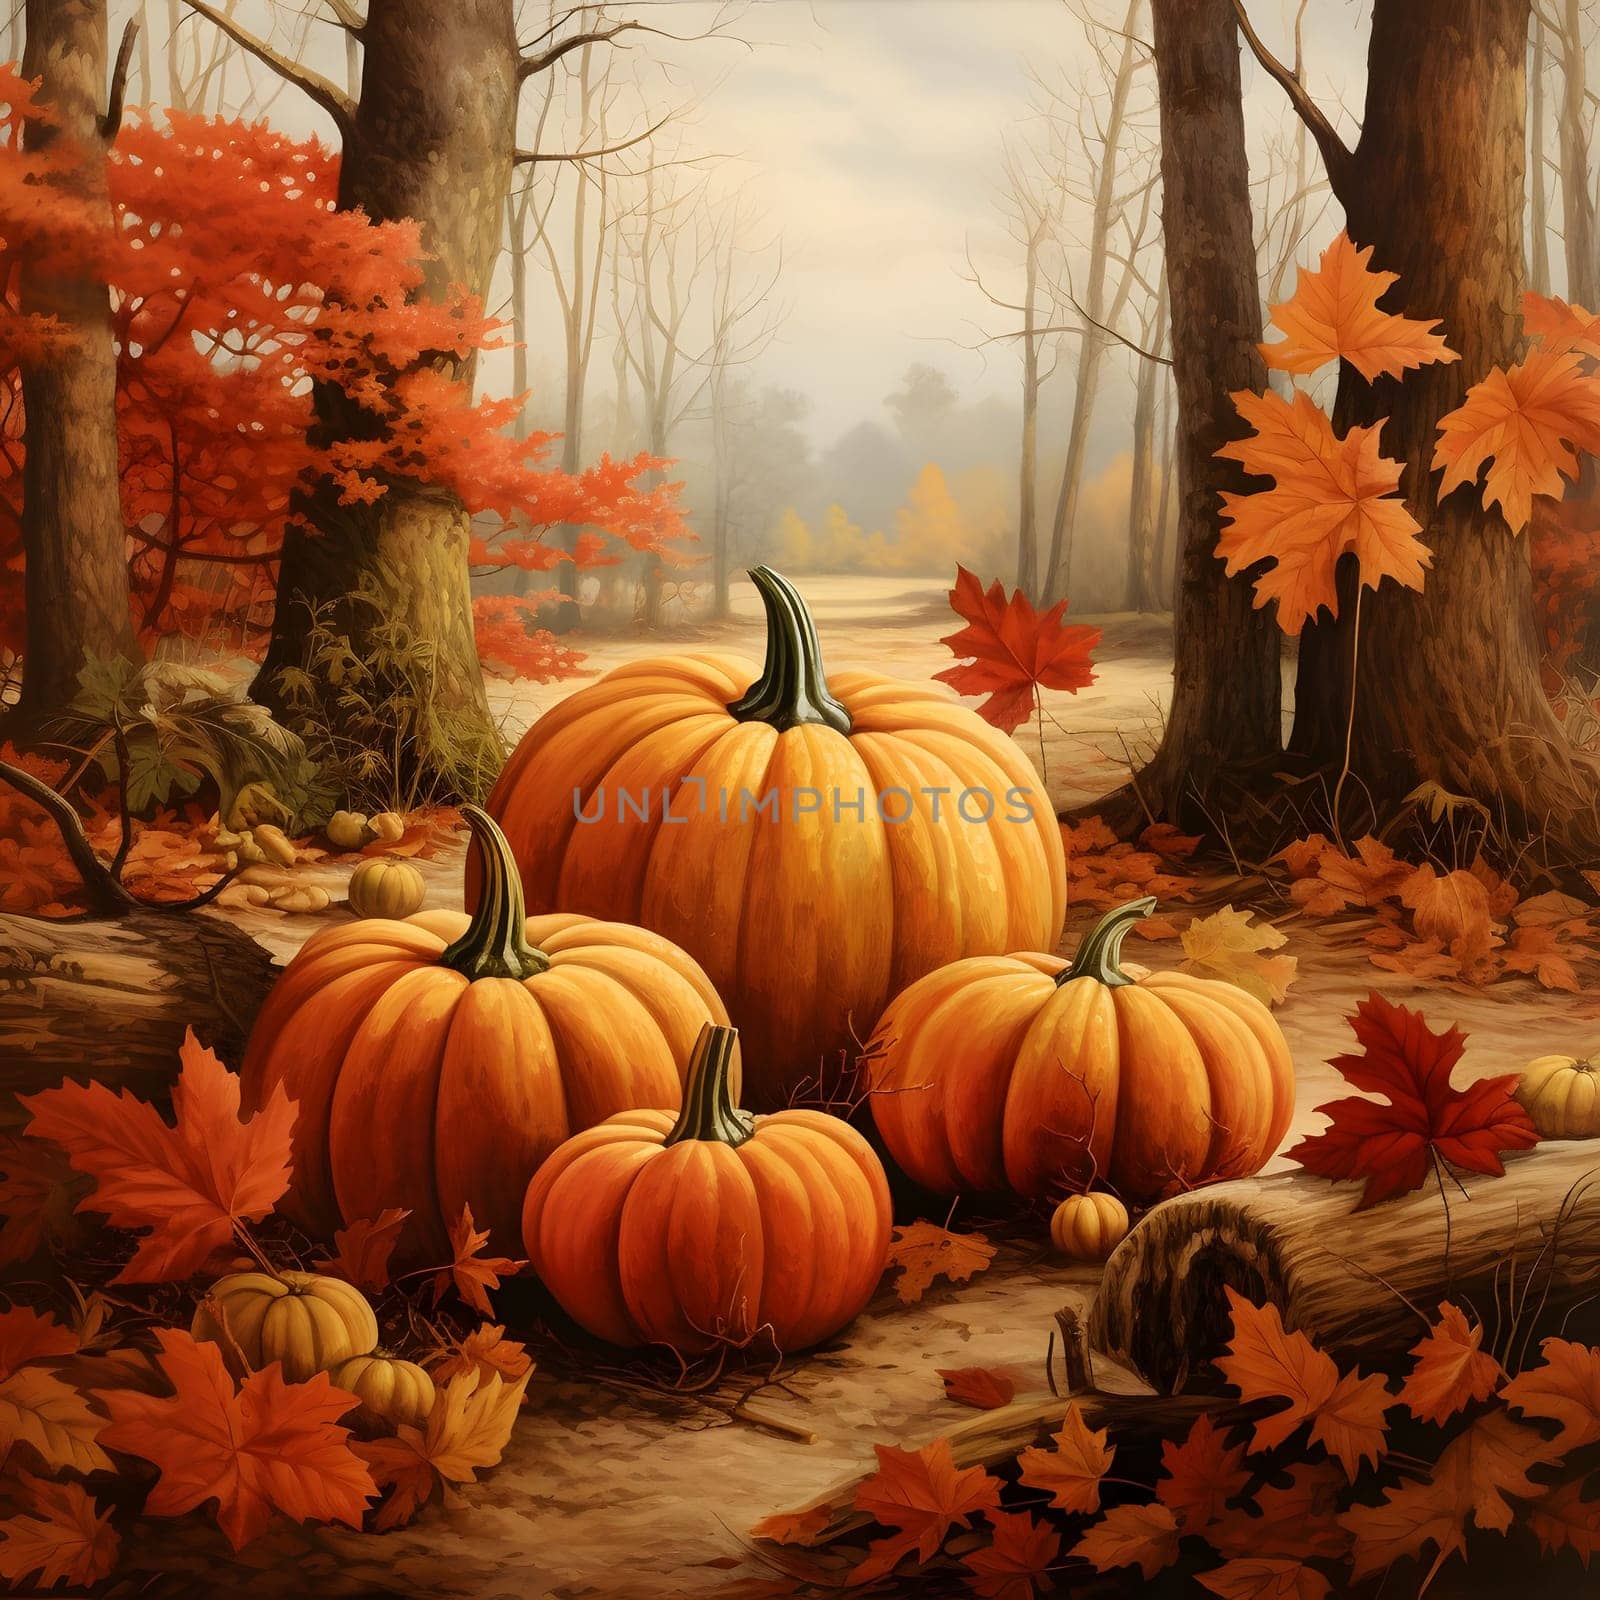 Illustration of an autumn forest in the middle of it pumpkins and leaves. Pumpkin as a dish of thanksgiving for the harvest. by ThemesS